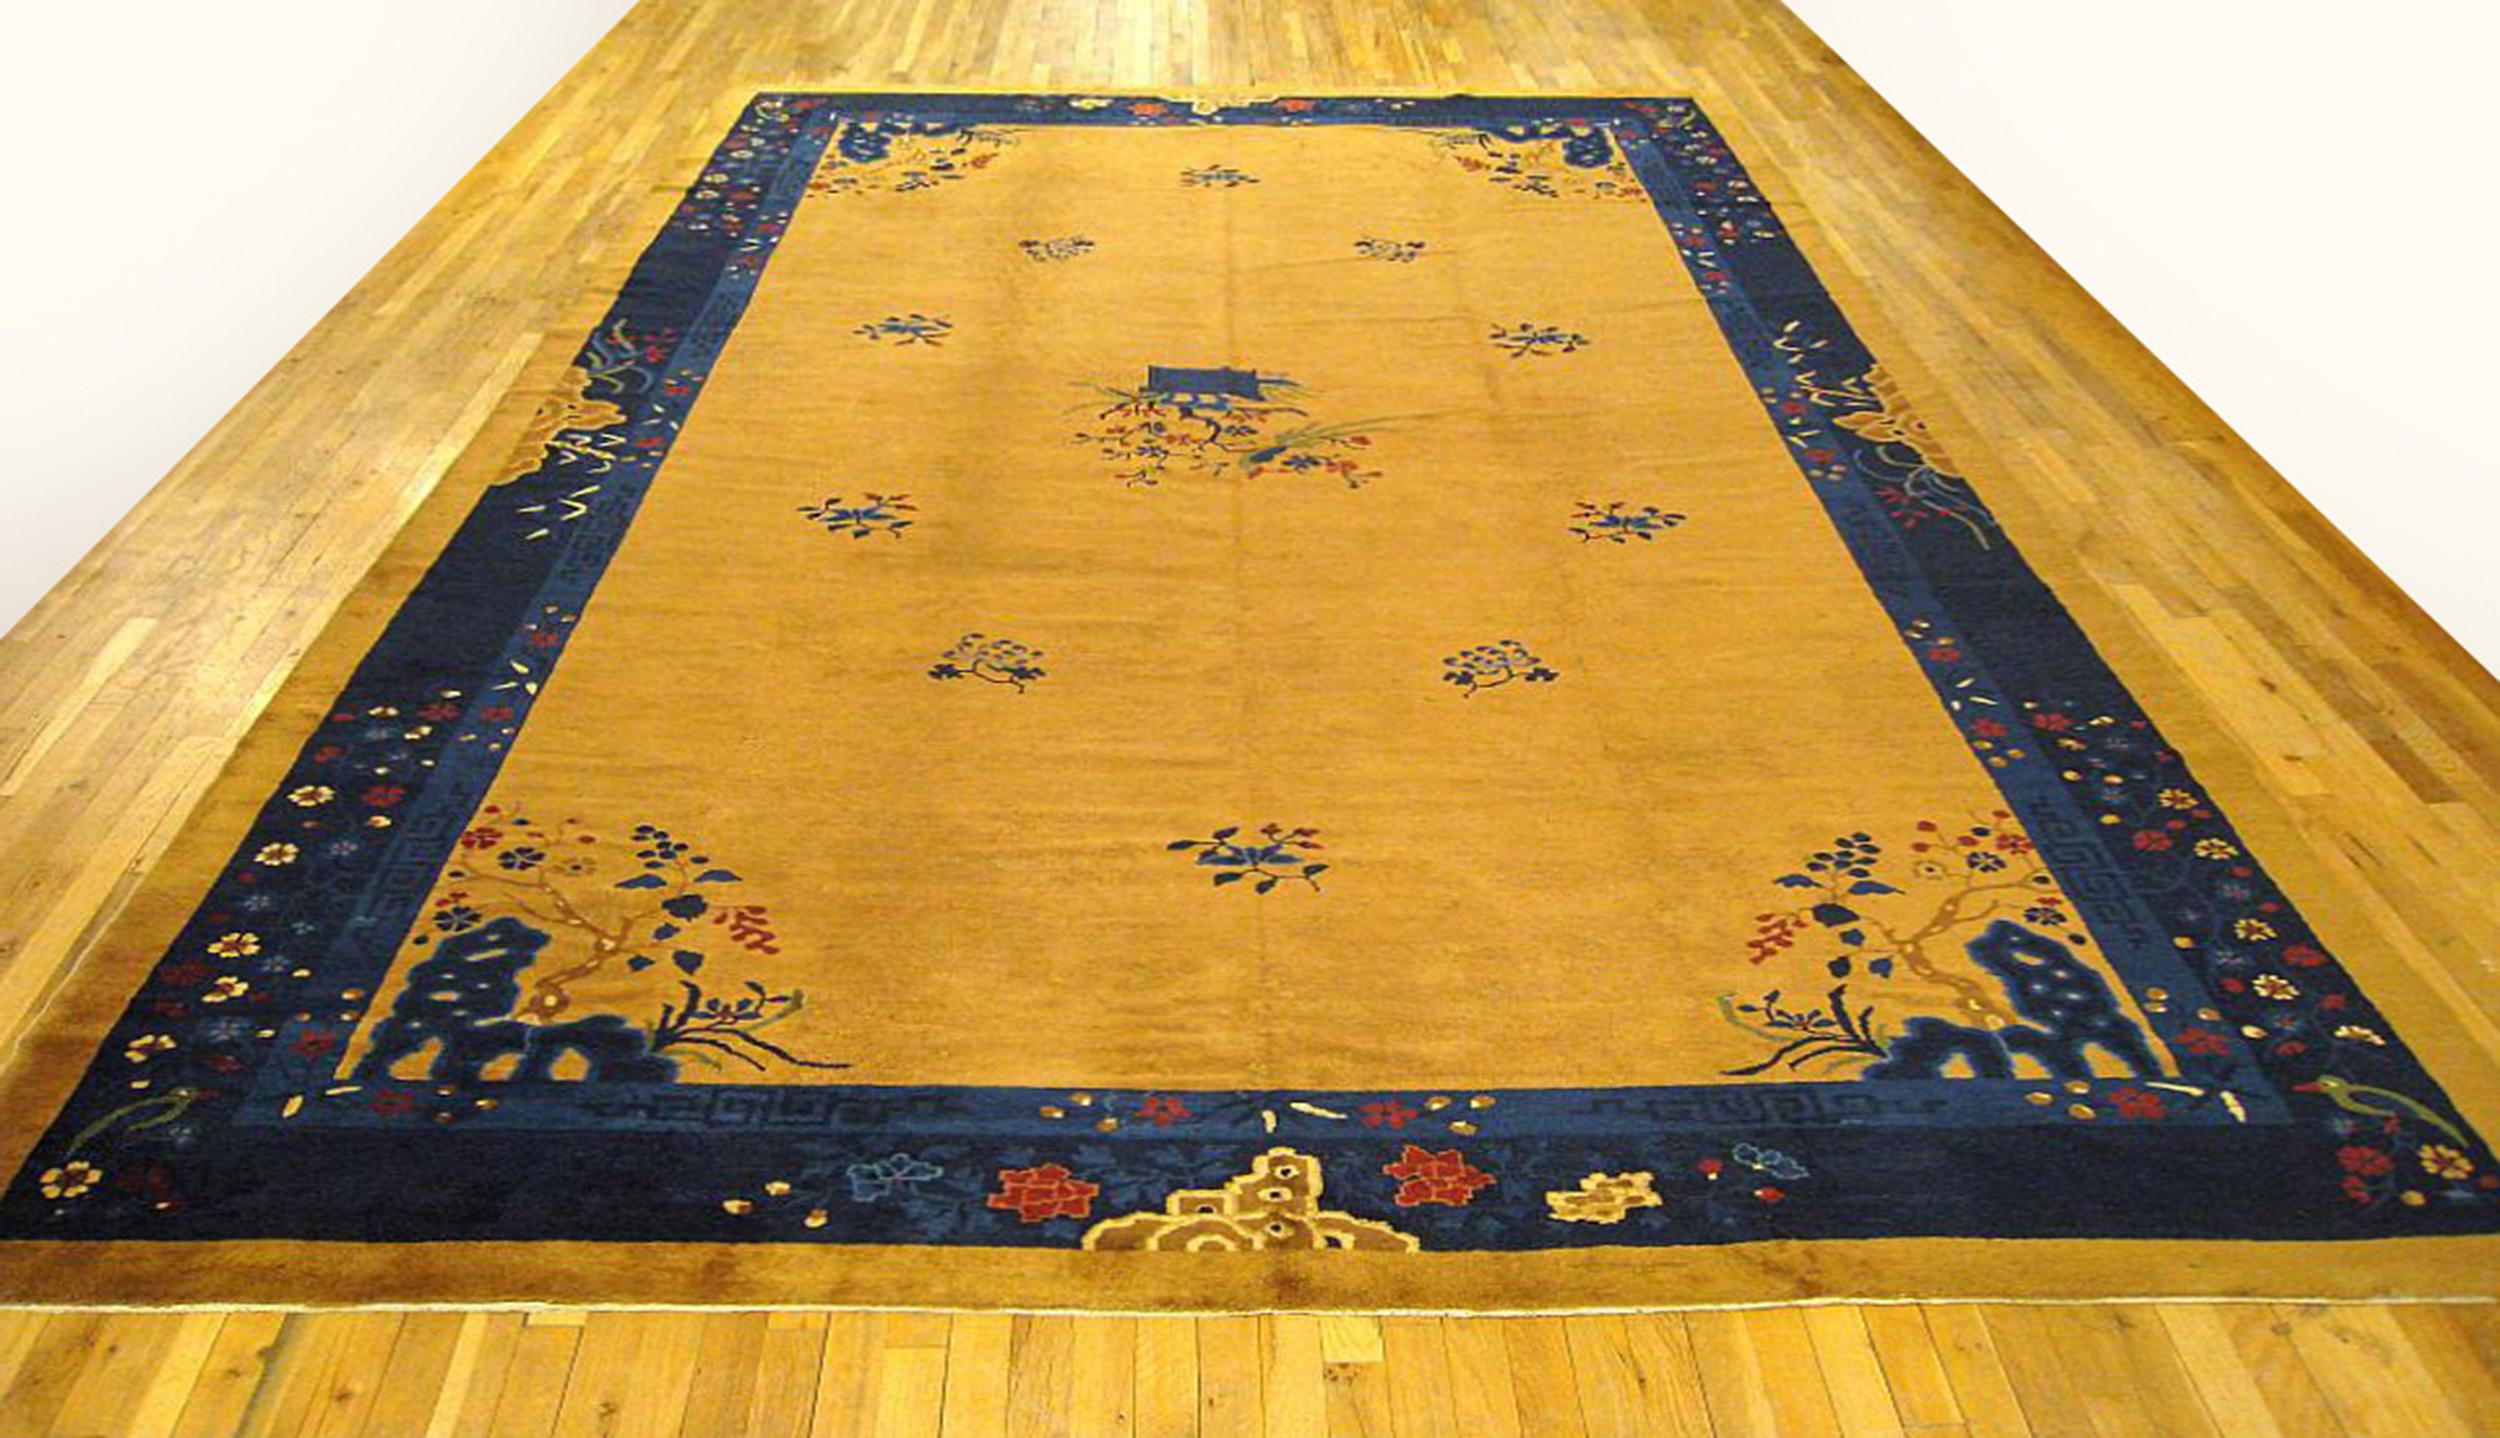 Antique Chinese Peking rug, large size, circa 1910.

A one-of-a-kind antique Chinese Peking oriental carpet, hand-knotted with medium thickness wool pile. This beautiful rug features chinese motifs on a camel central field, with a blue outer